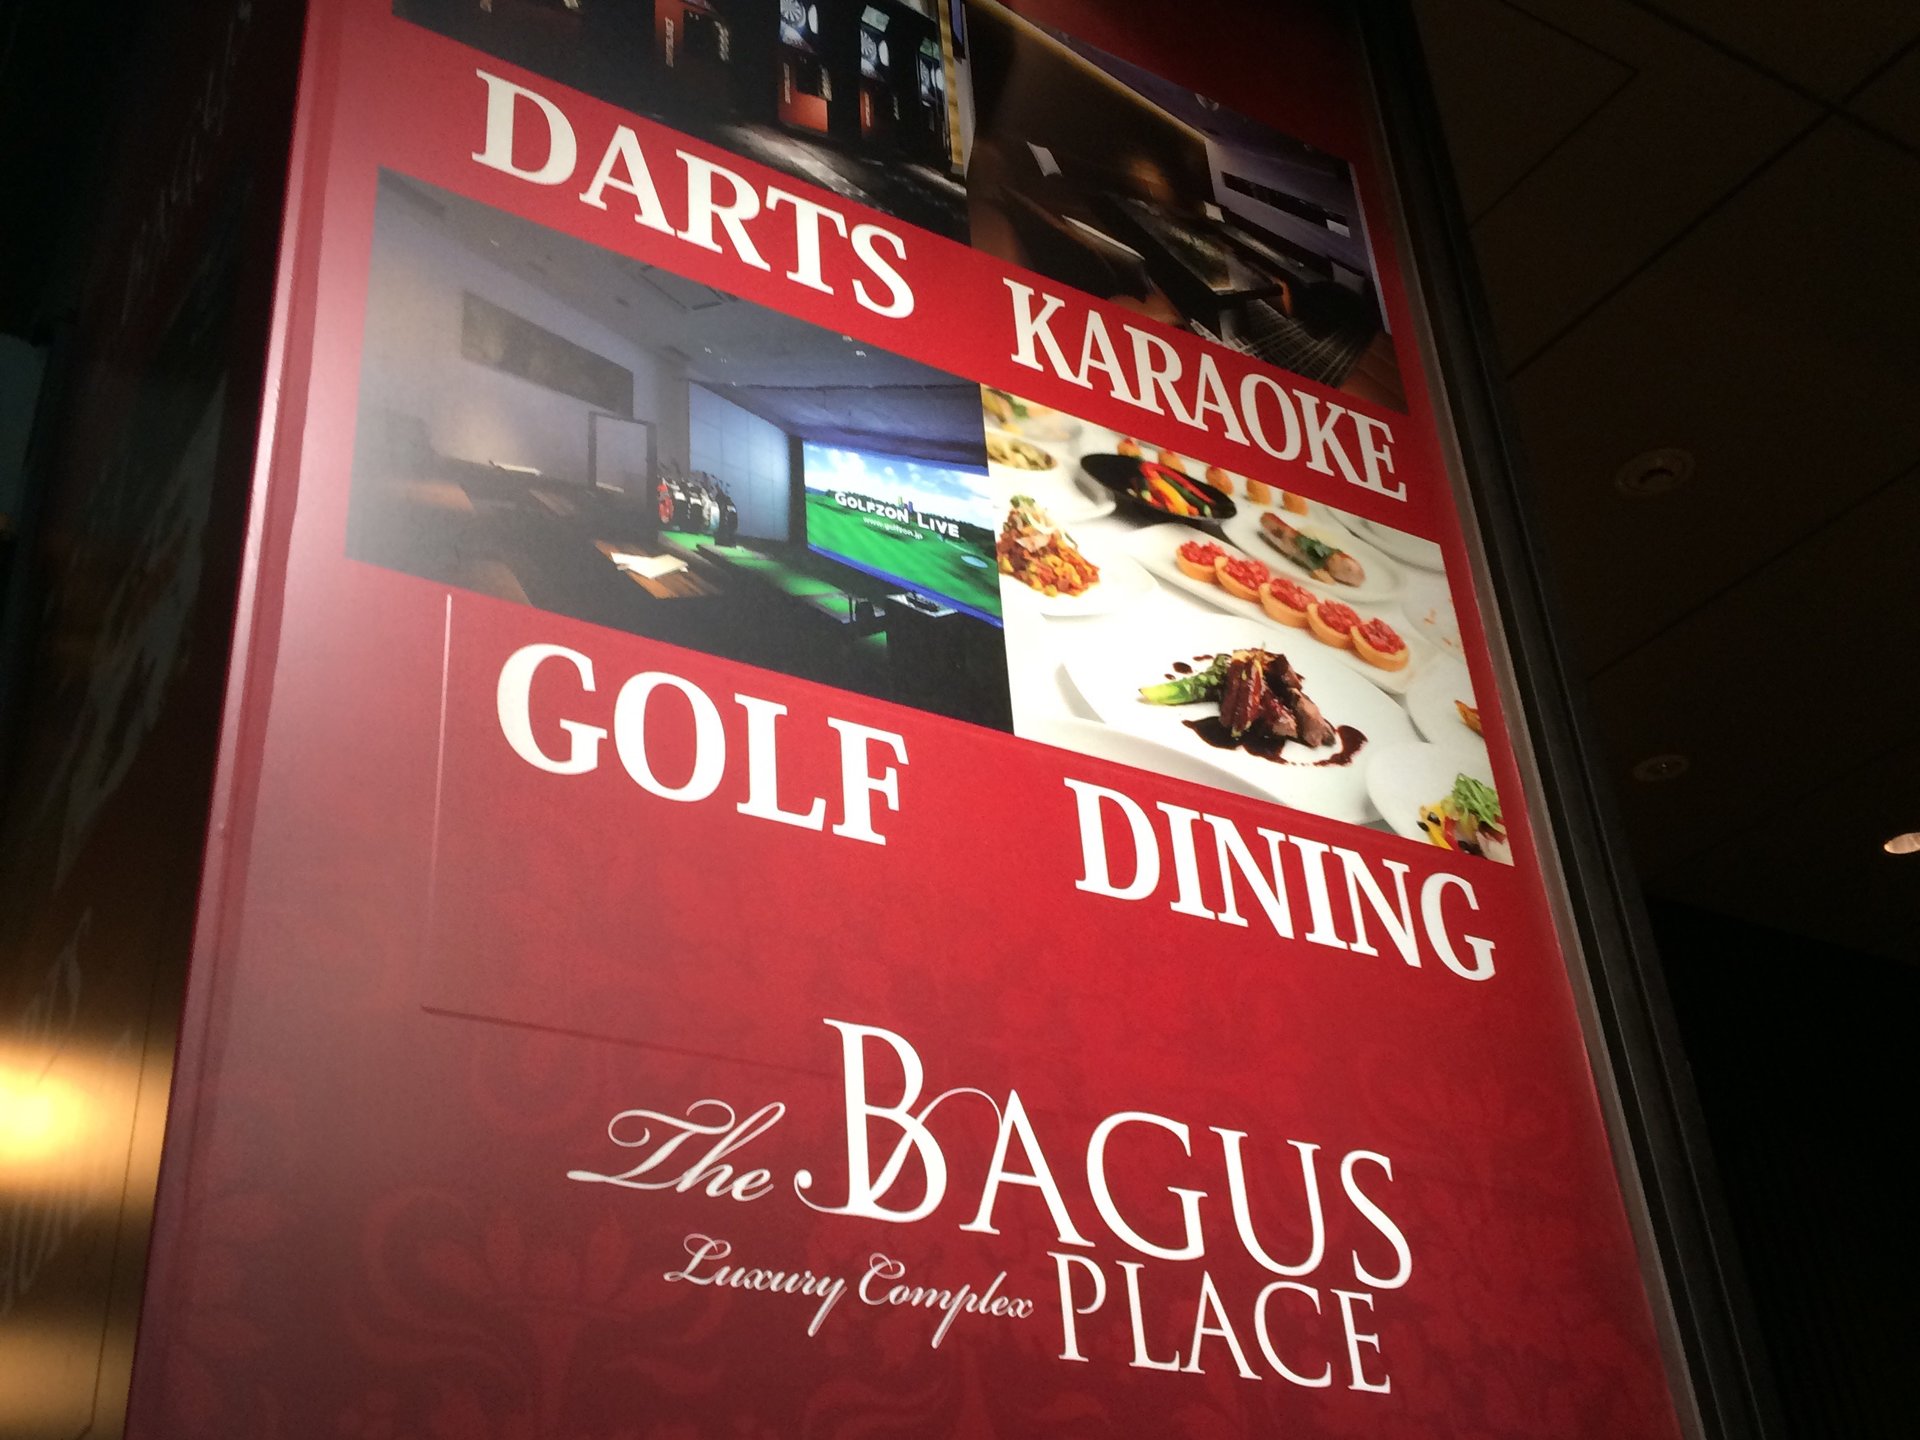 The BAGUS PLACE